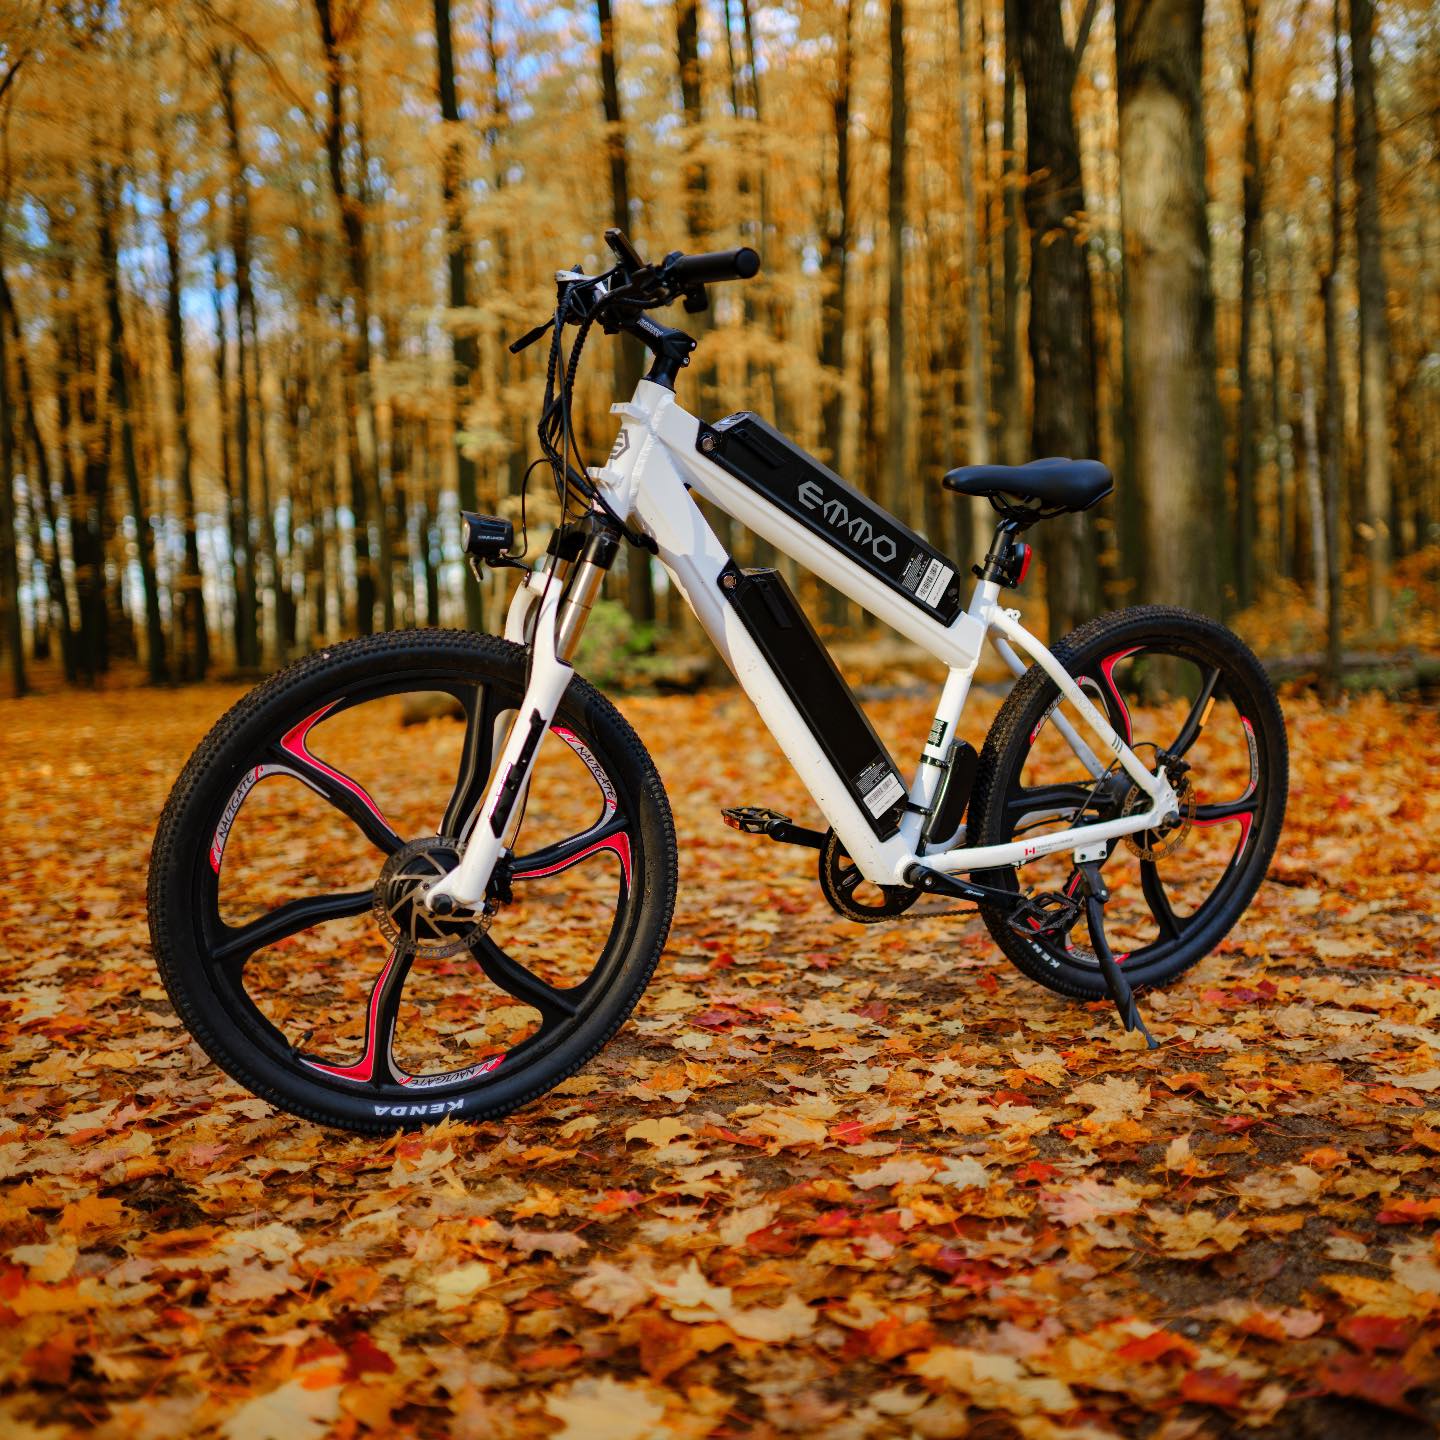 Enjoy the Fall colors with your E-Bike